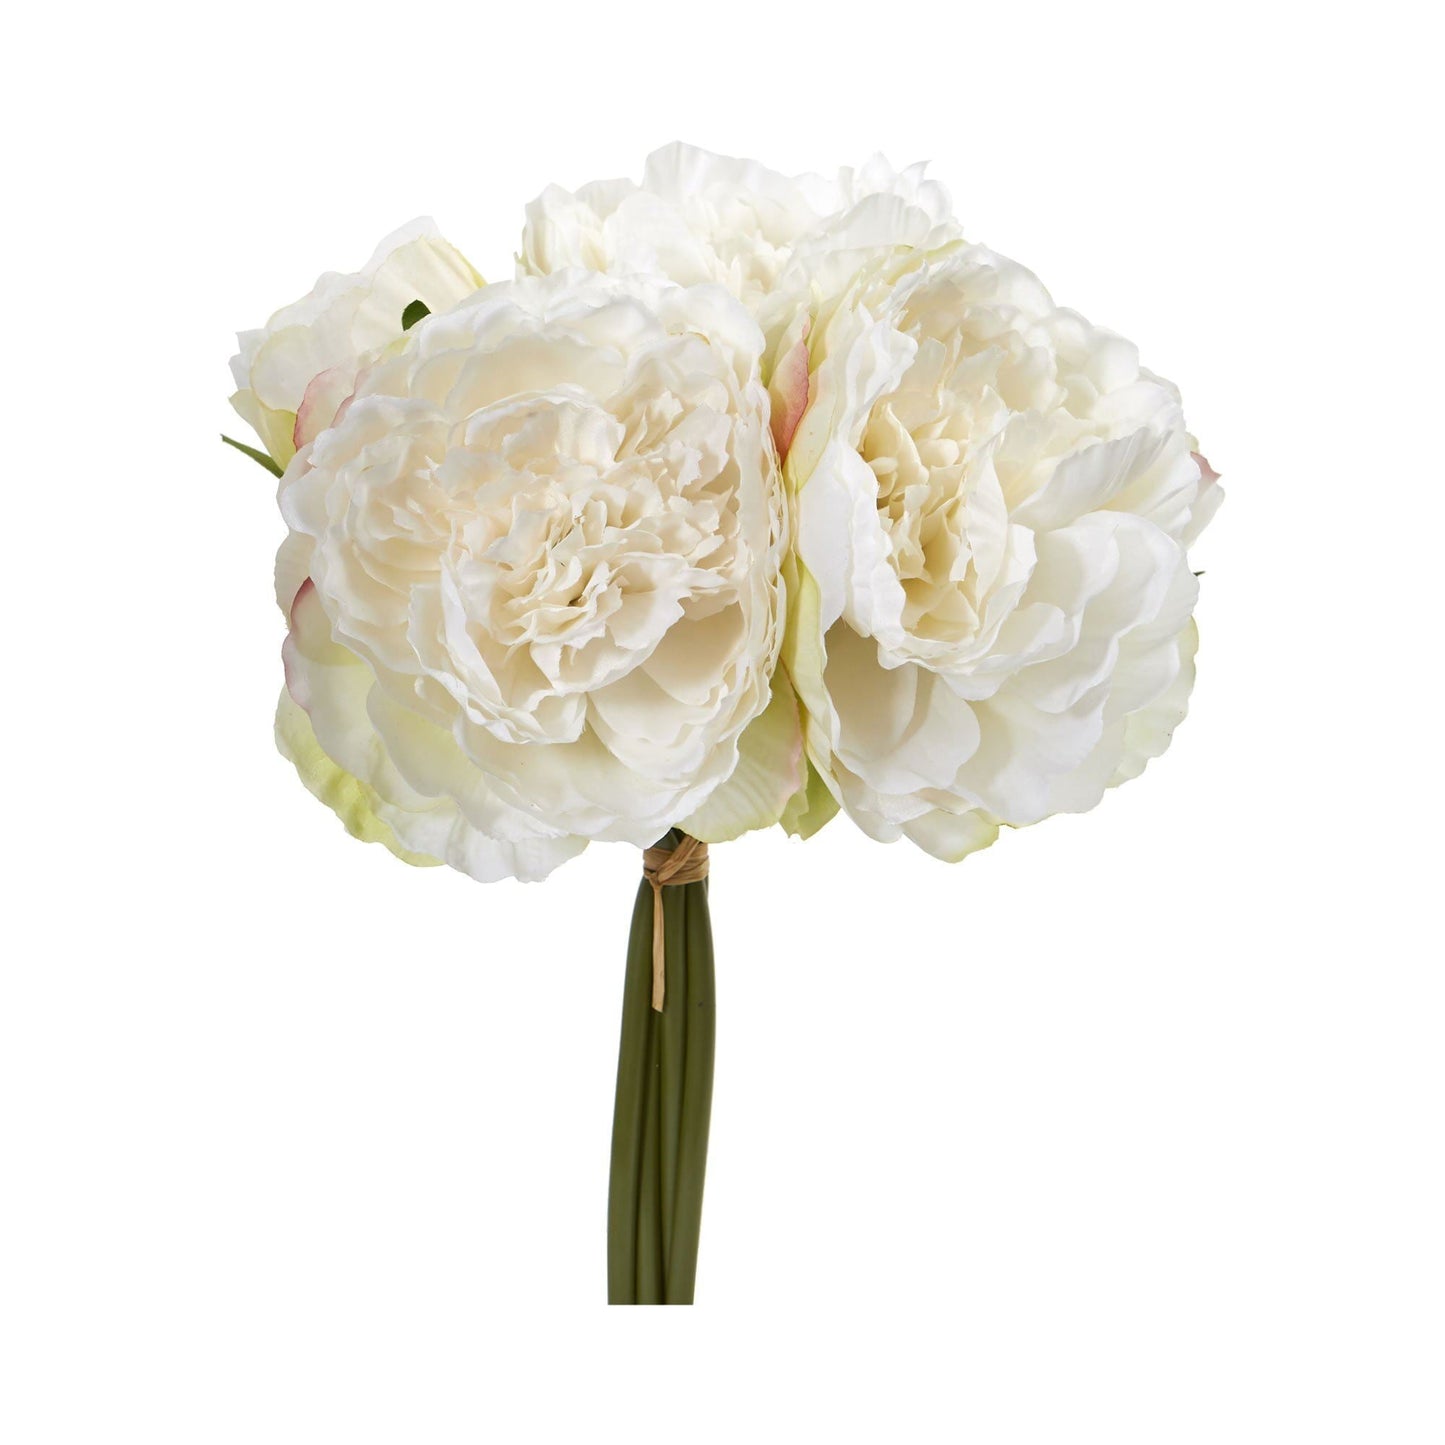 Peony Bouquet Artificial Flower (Set of 6) by Nearly Natural